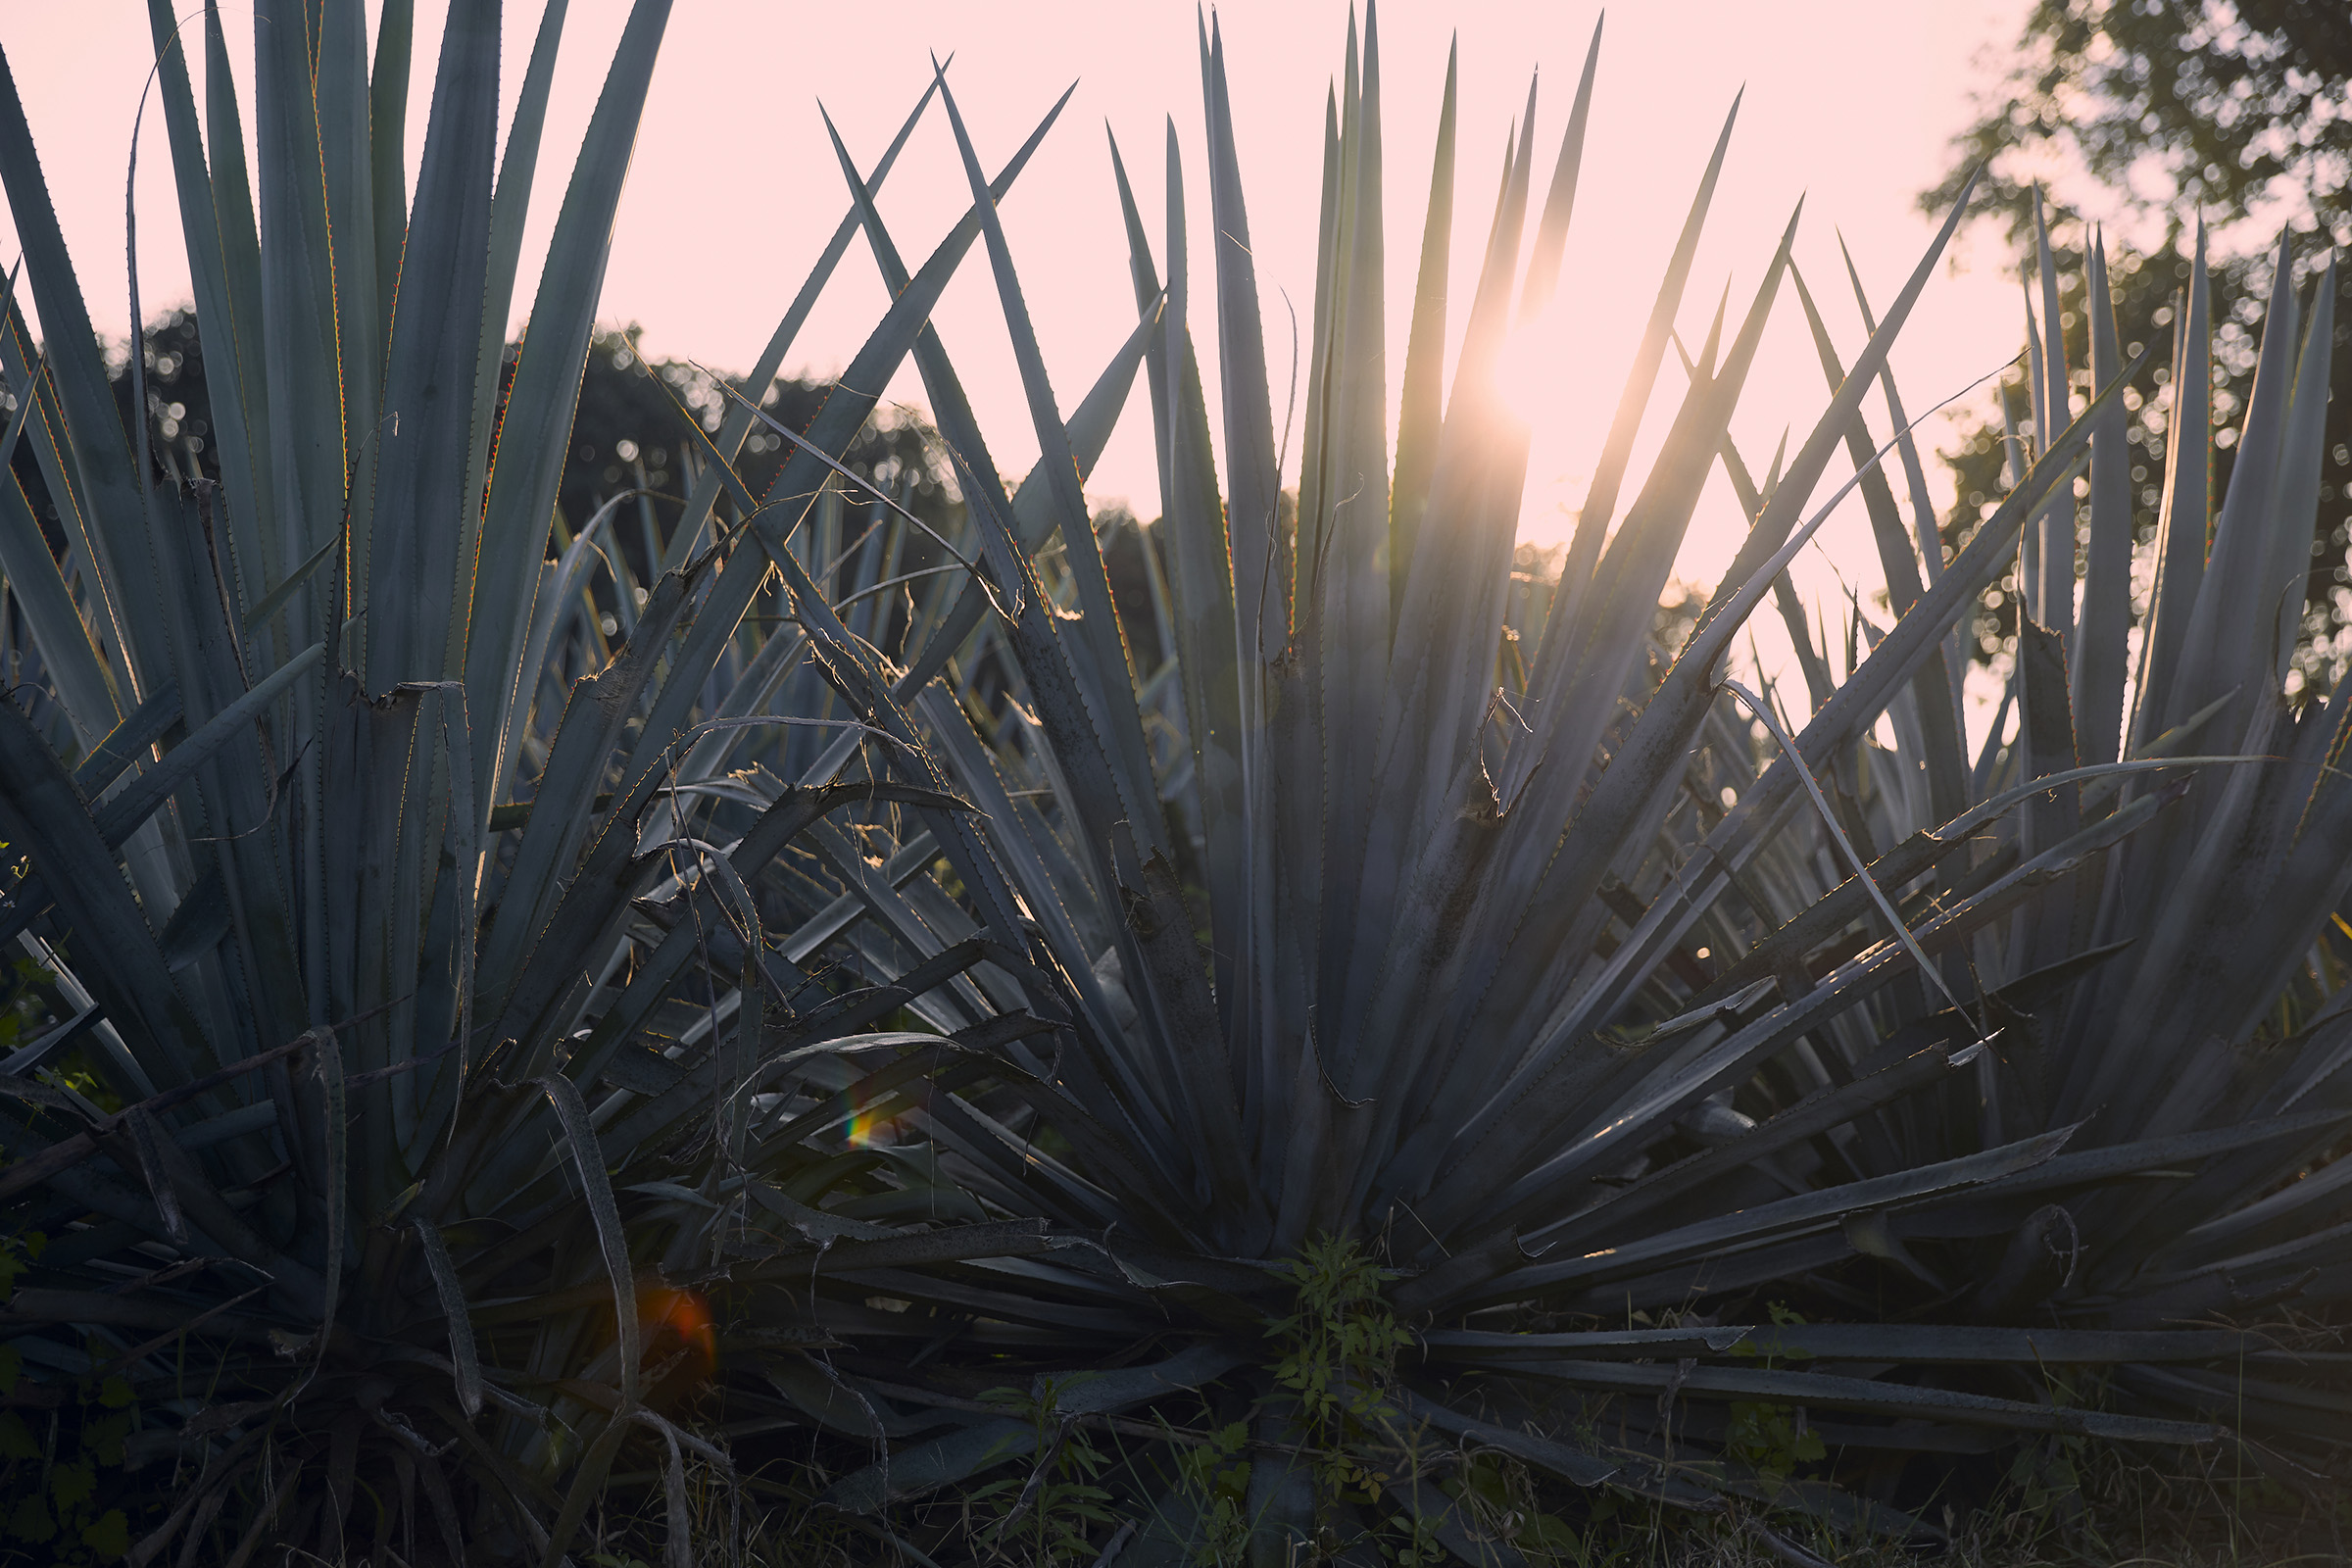 Documented the tequila making process in Jalisco, Mexico and helped build brand recognition with an emerging boutique tequila by traveling through Mexico and capturing different aspects of “taking it slow”